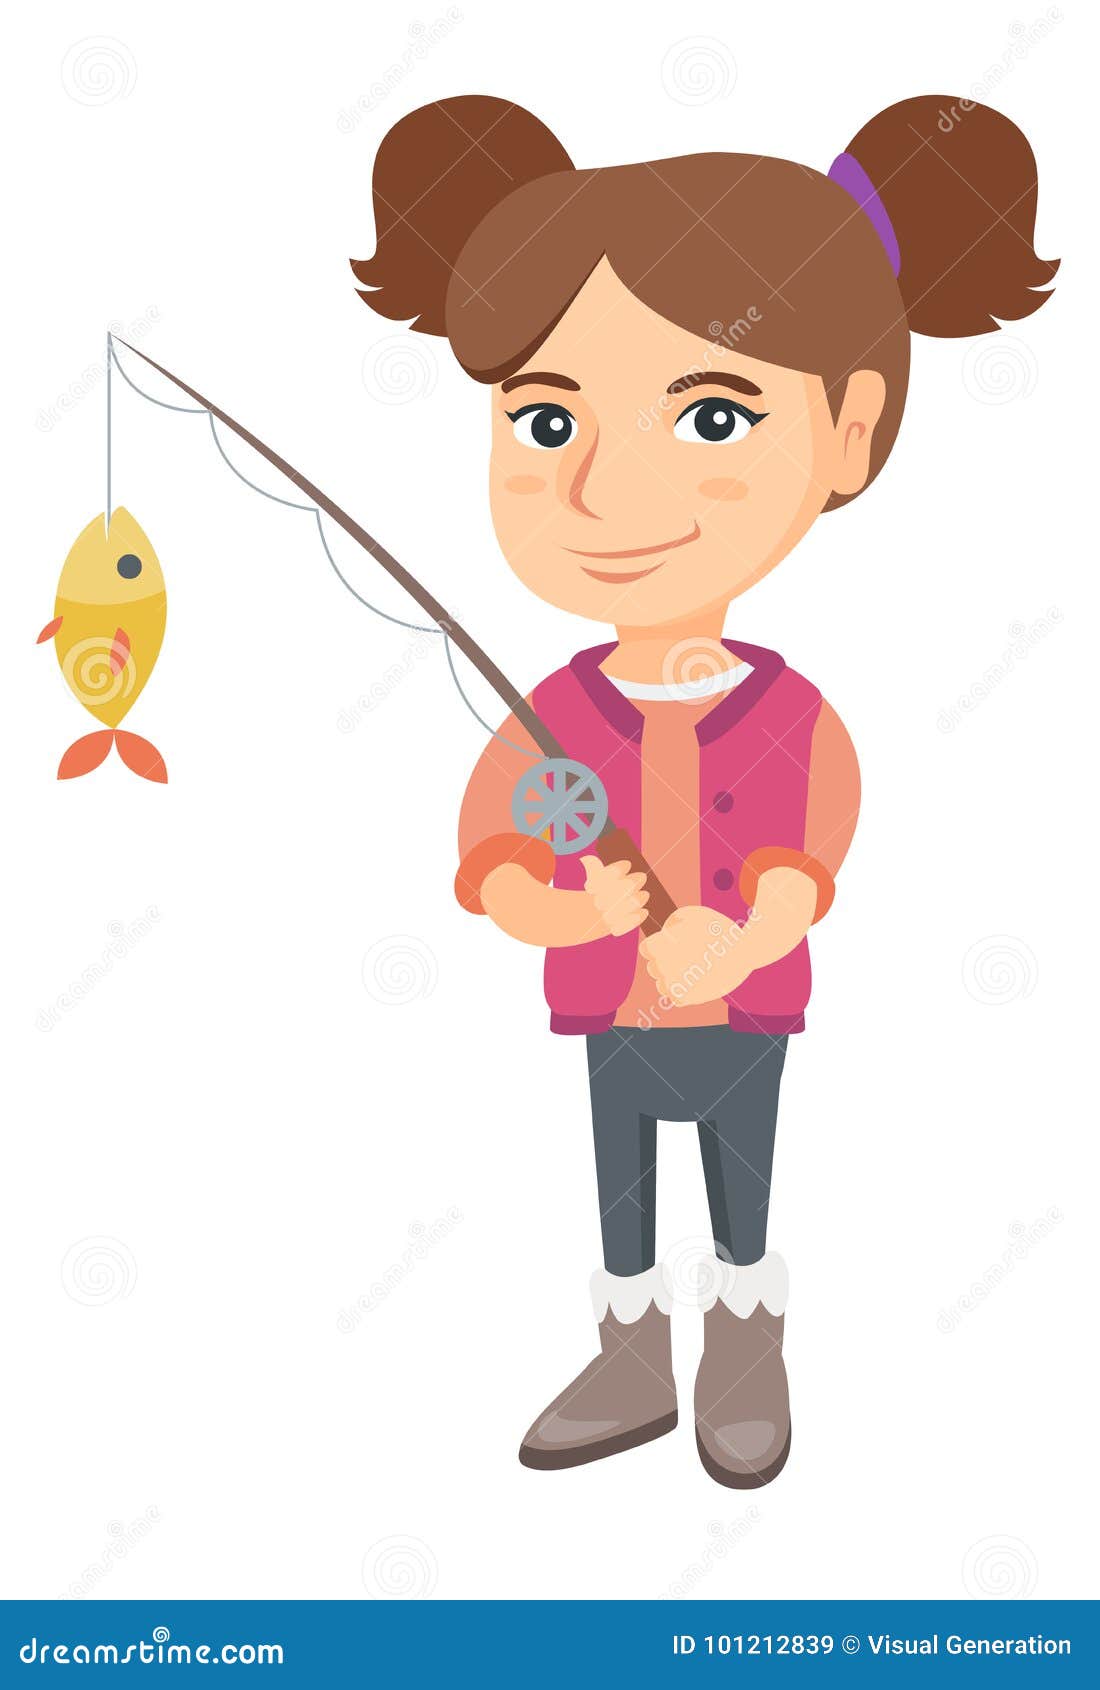 Little Girl Holding Fishing Rod with Fish on Hook. Stock Vector